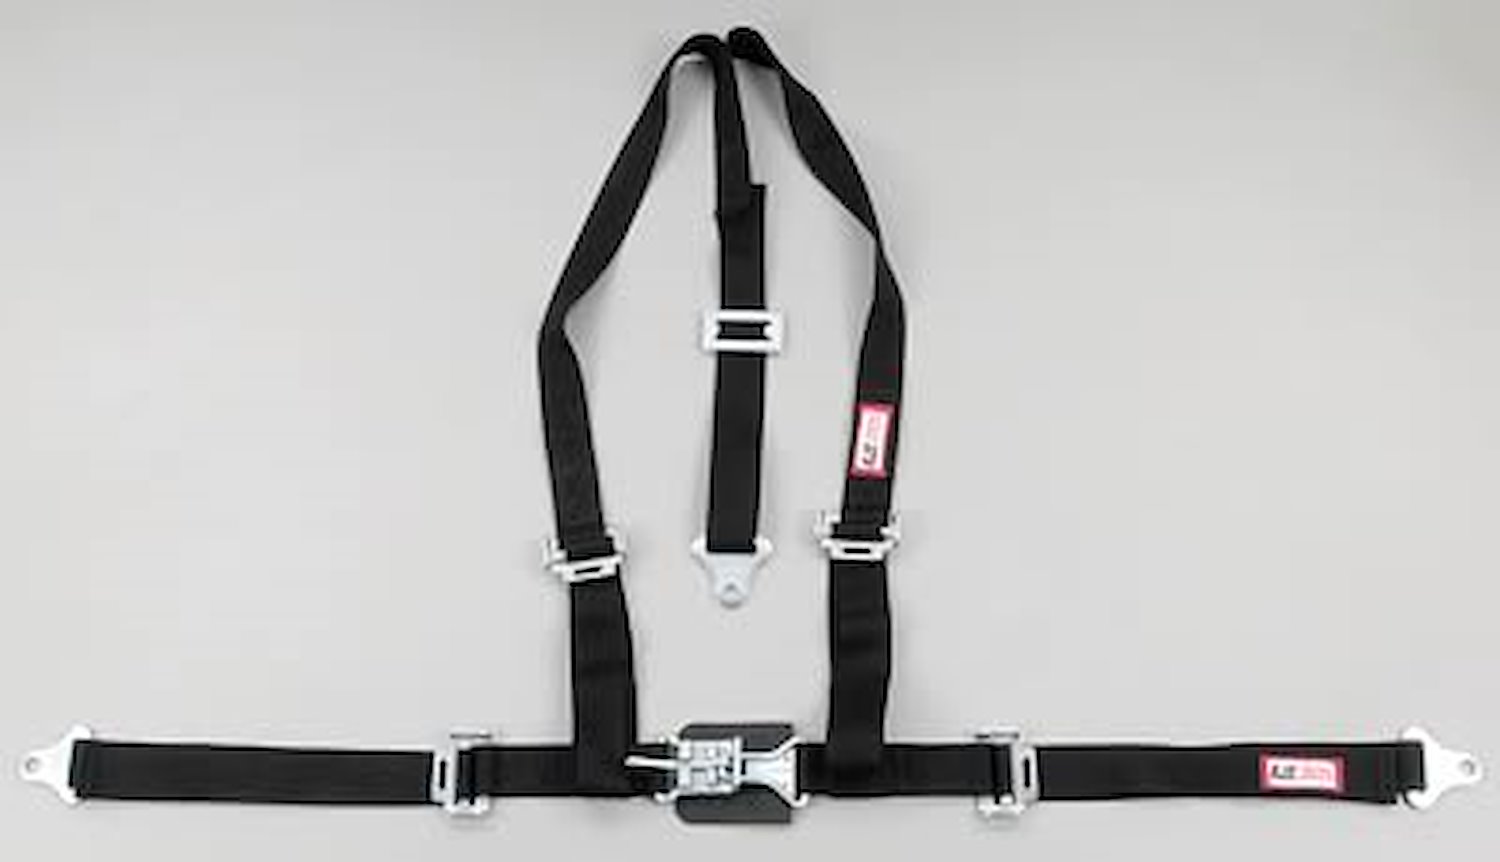 NON-SFI L&L HARNESS 2 PULL DOWN Lap Belt w/Adjuster 2 S.H. Individual FLOOR Mount ALL WRAP ENDS GRAY